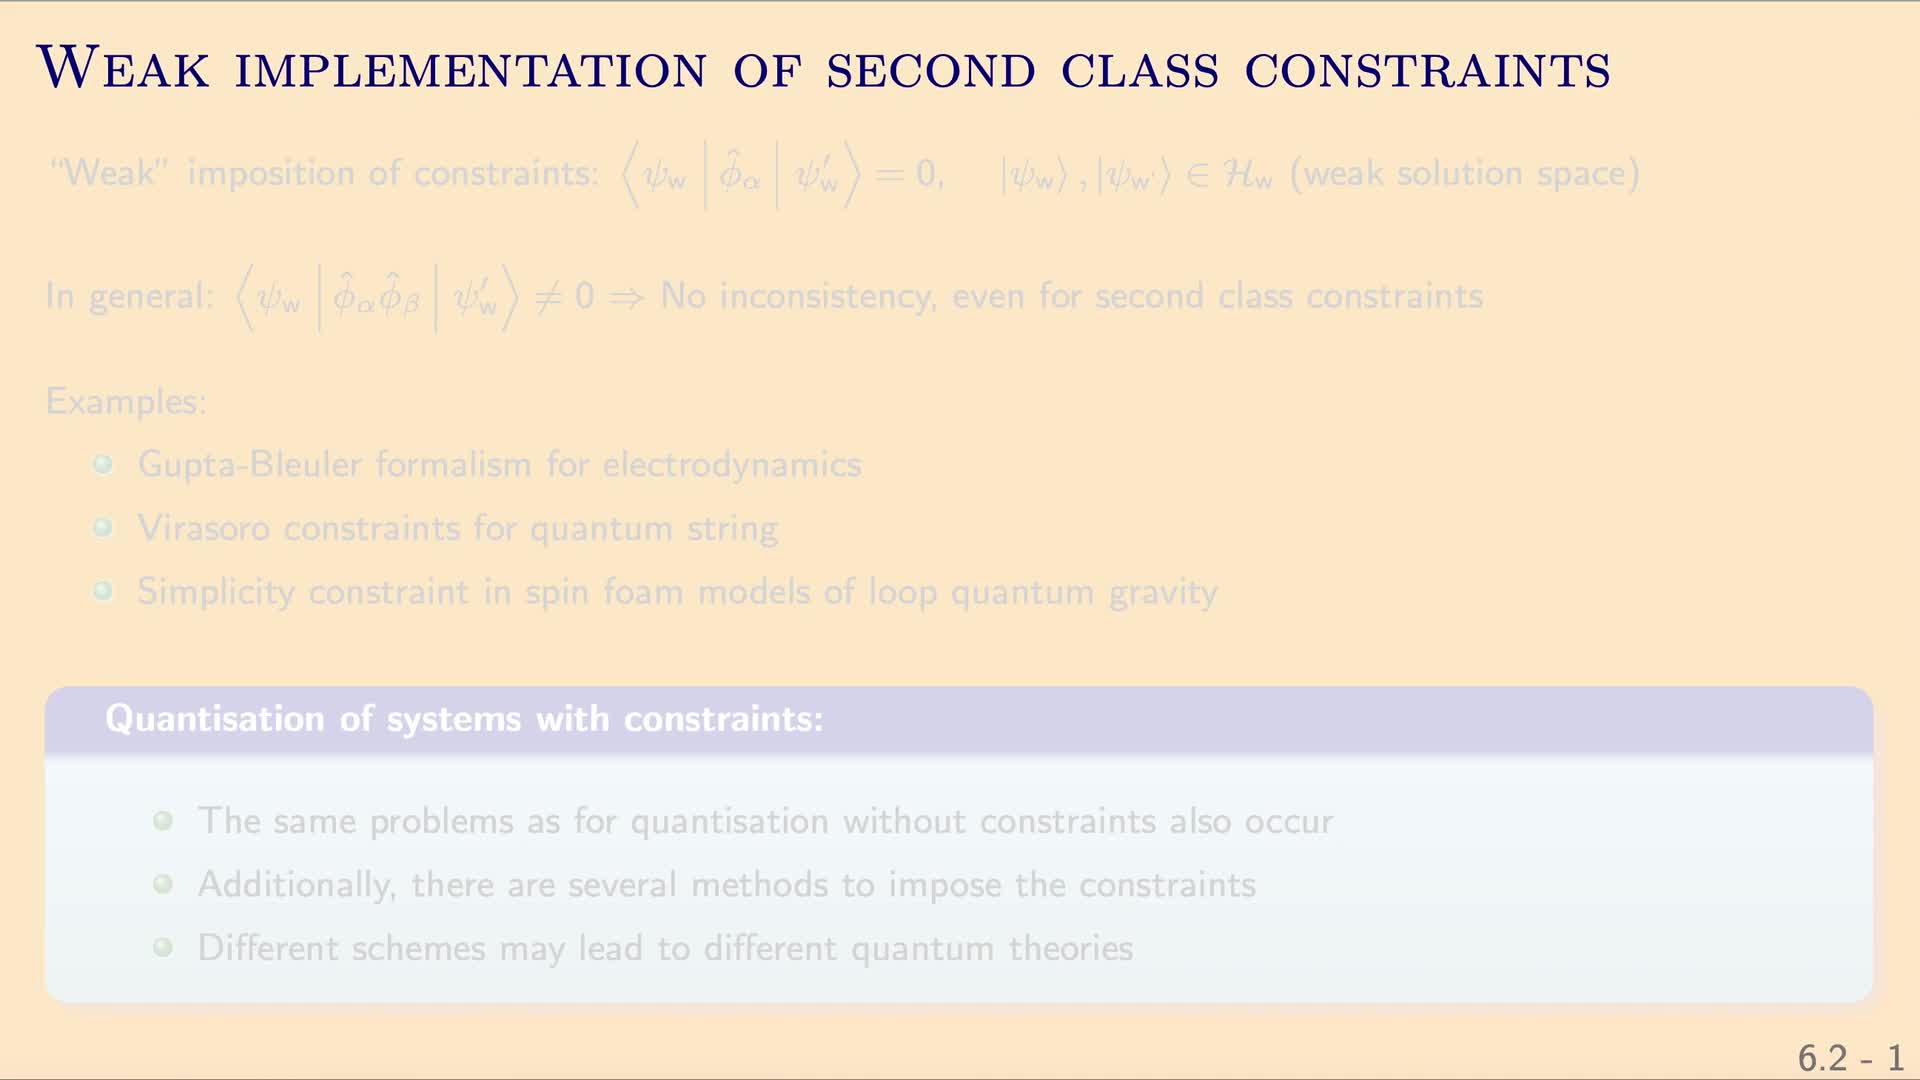 QG II: 6.2.3 - Quantisation of second class systems